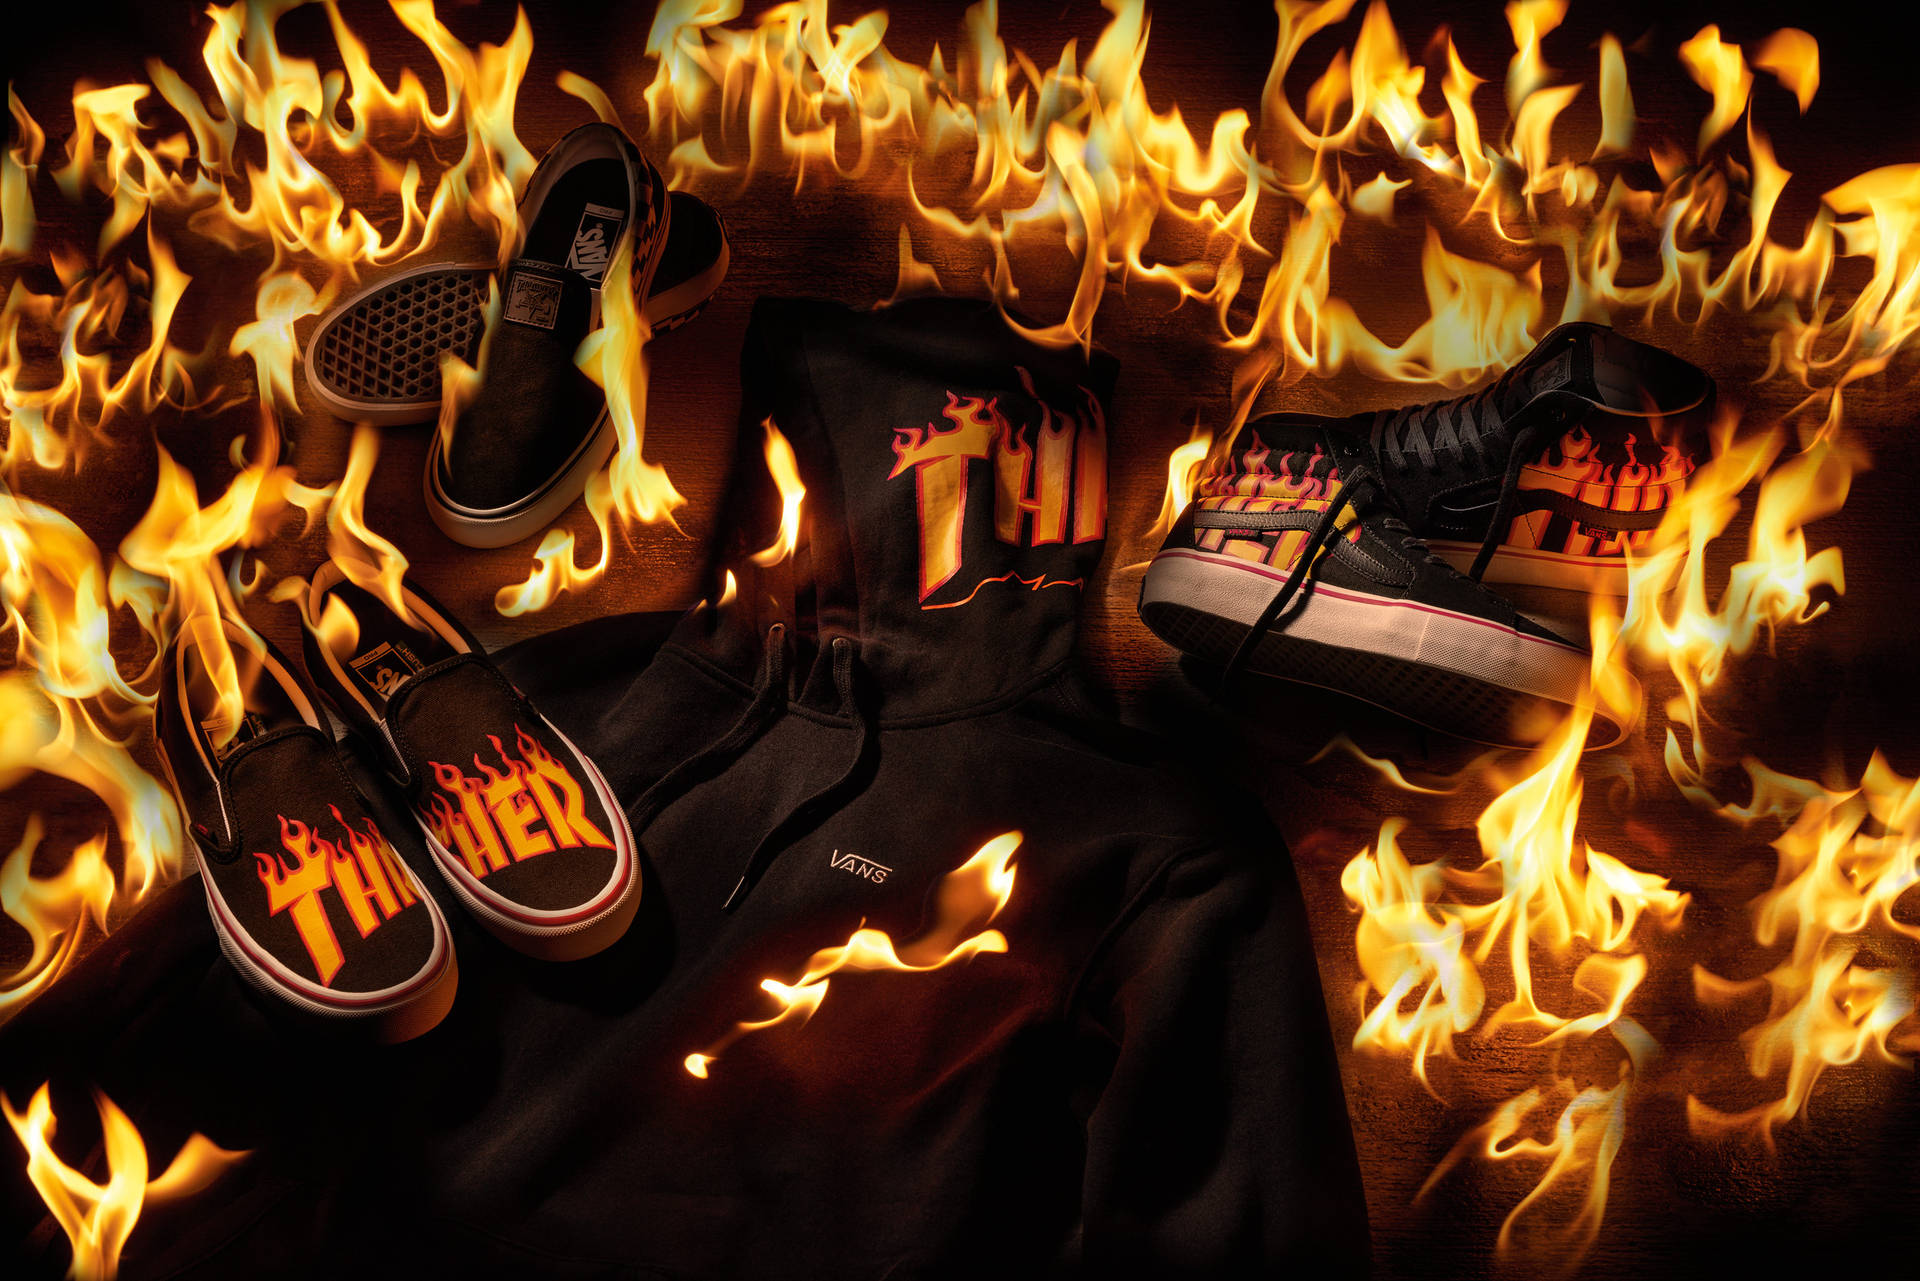 Thrasher's On Vans Collection Background